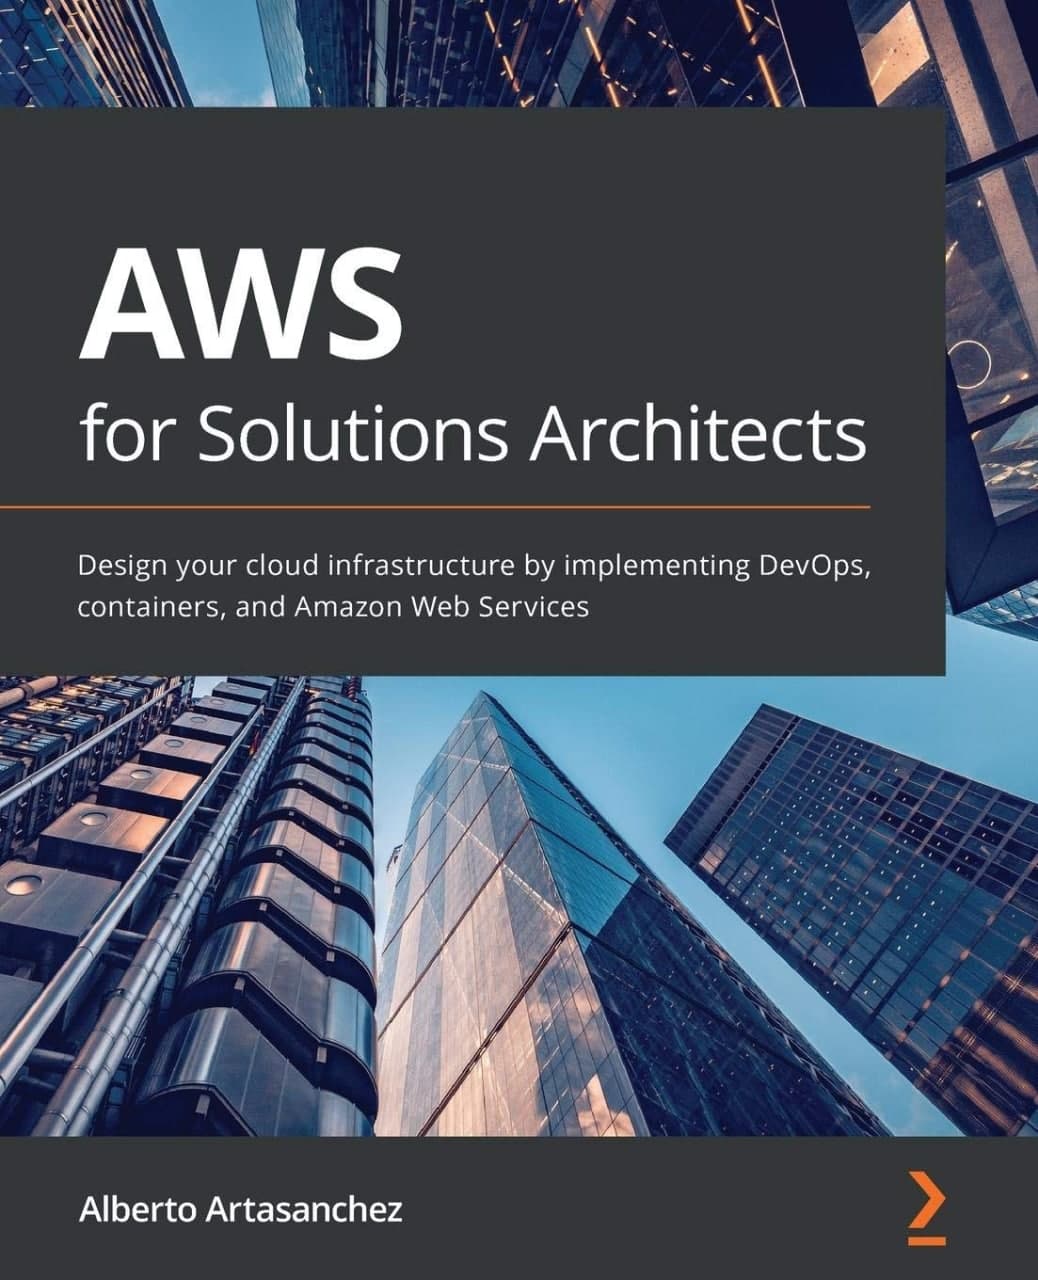 AWS for Solutions Architects.jpg